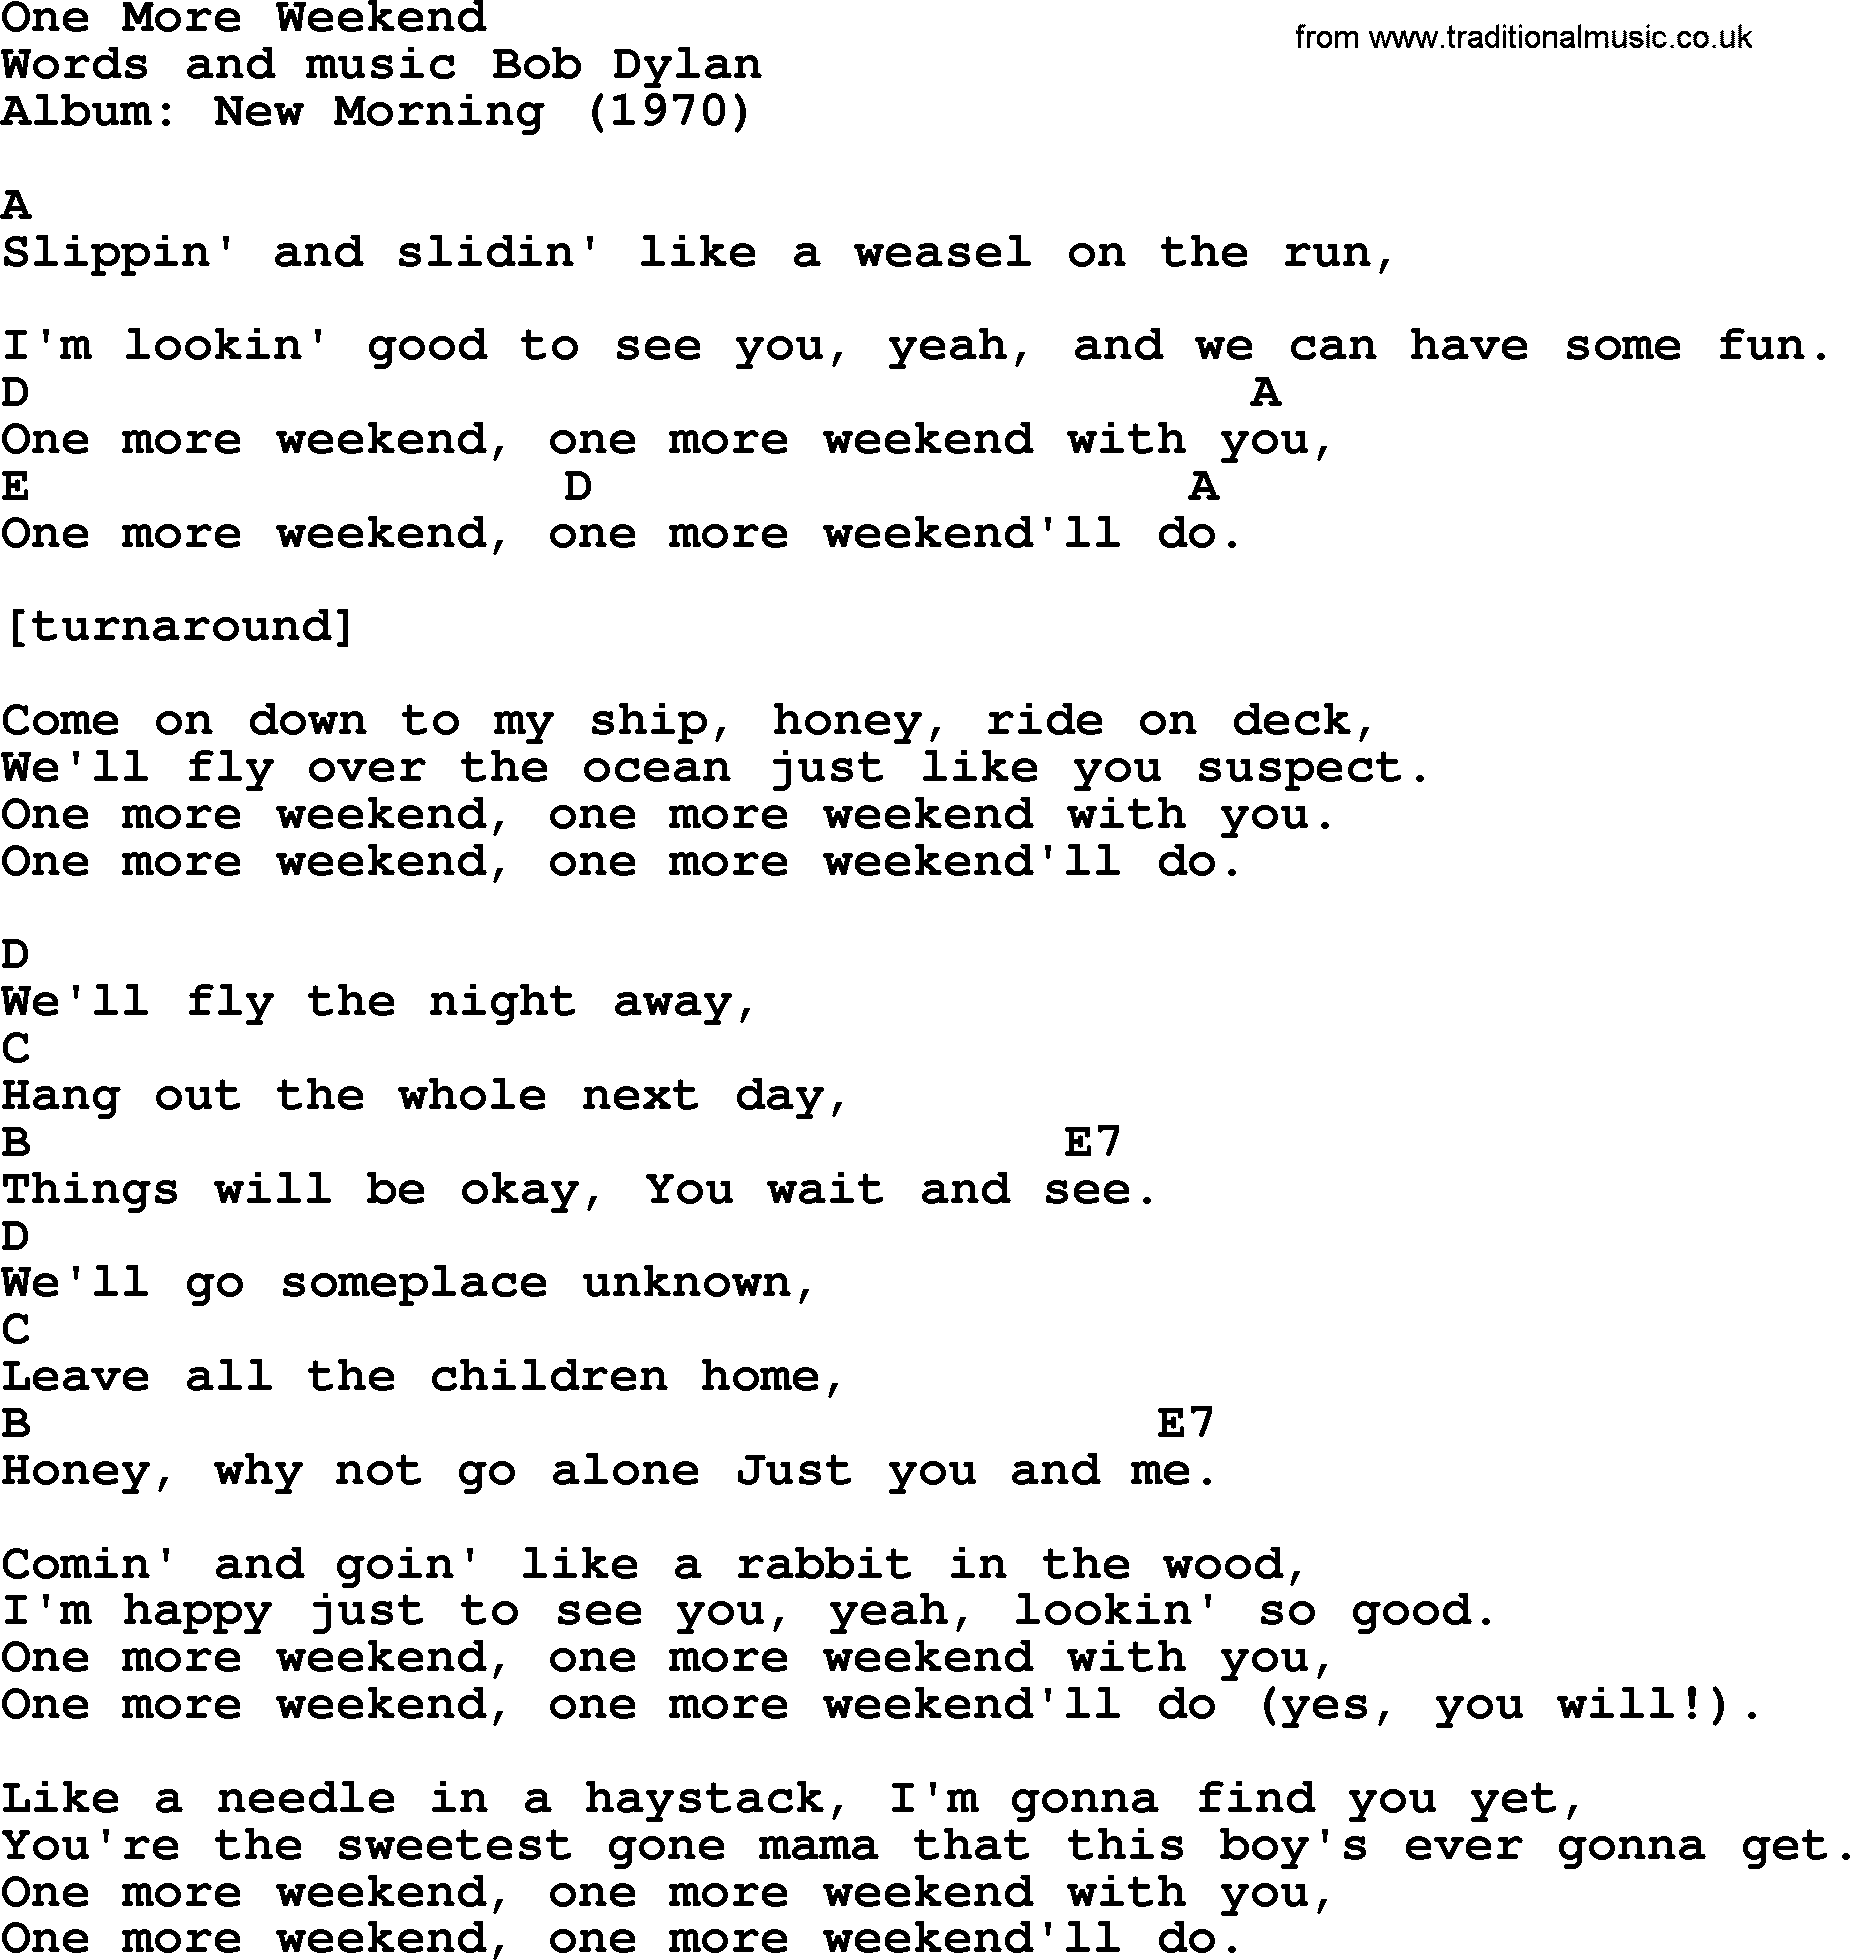 Bob Dylan song, lyrics with chords - One More Weekend